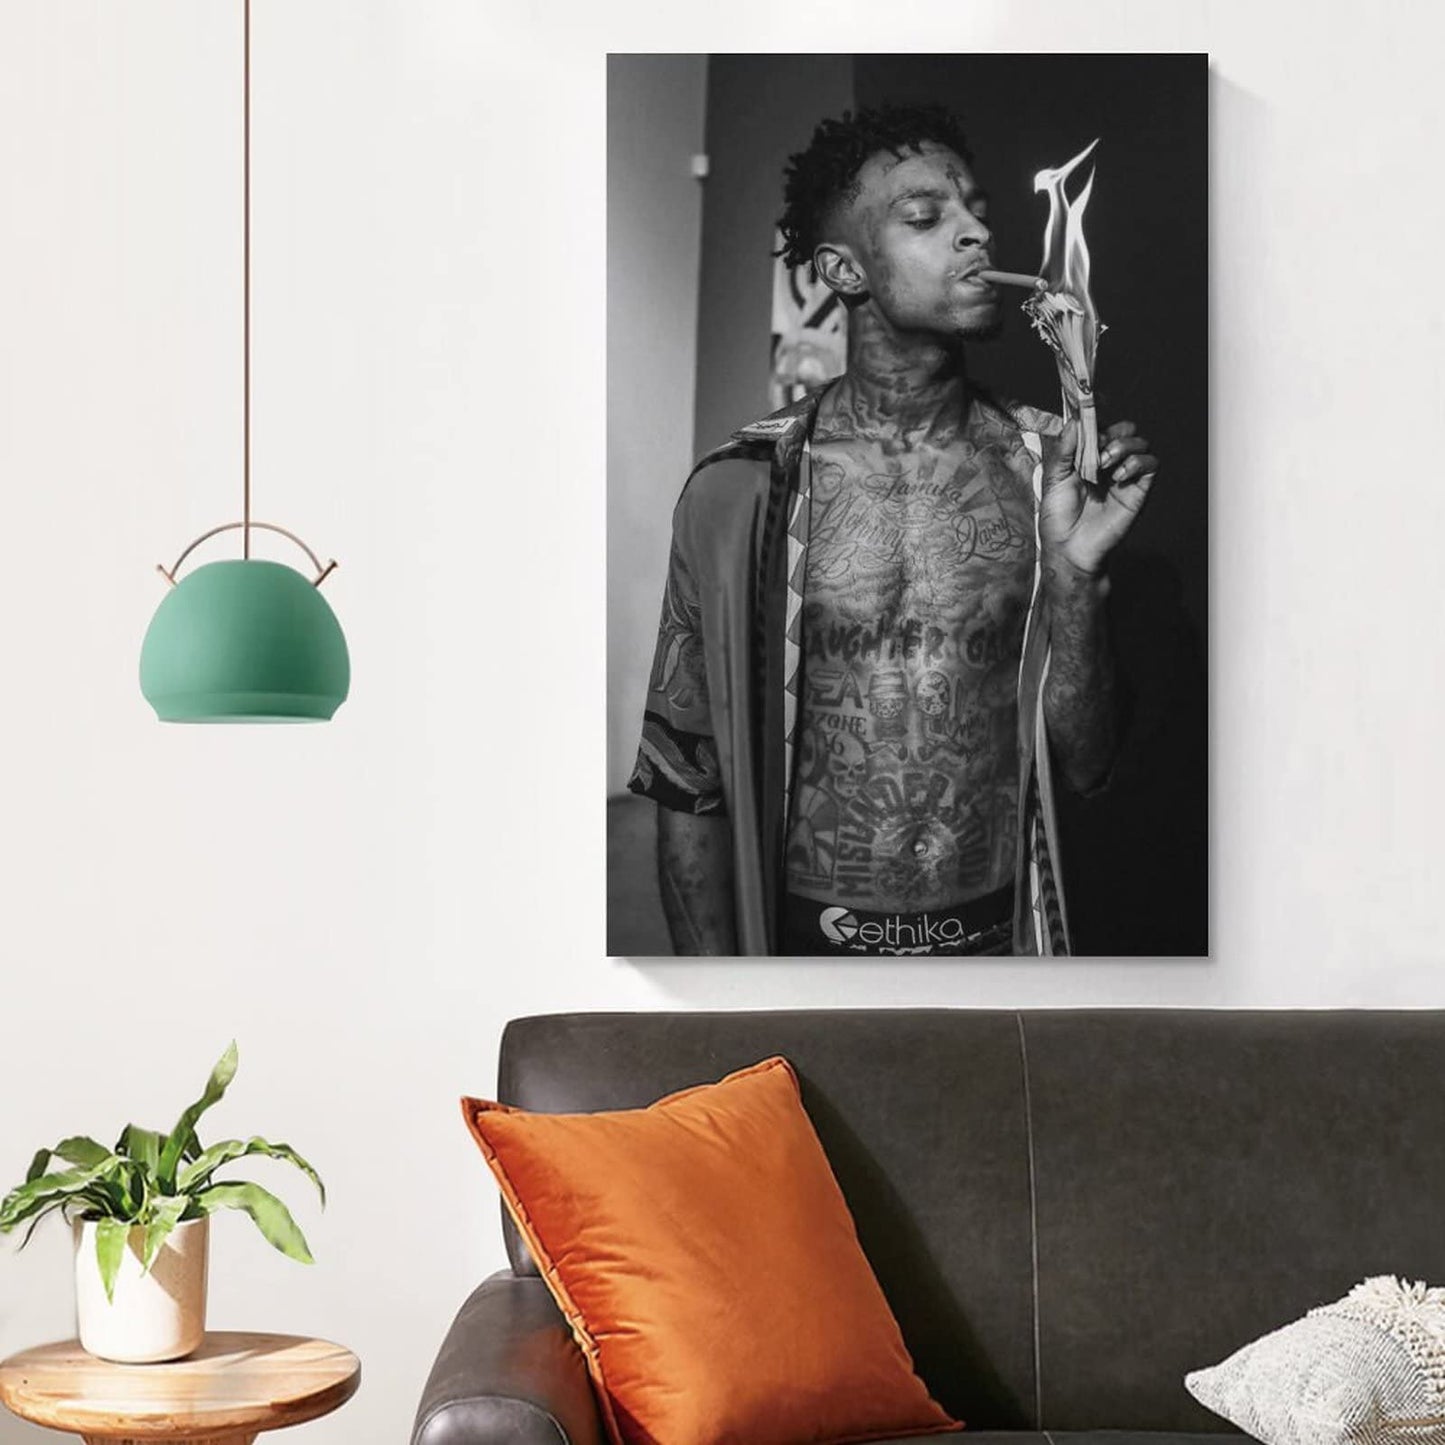 BICHI 21 Savage Poster Posters For Room Aesthetic Canvas Art Poster And Wall Art Picture Print Modern Family Bedroom Decor Posters 12x18inch(30x45cm)